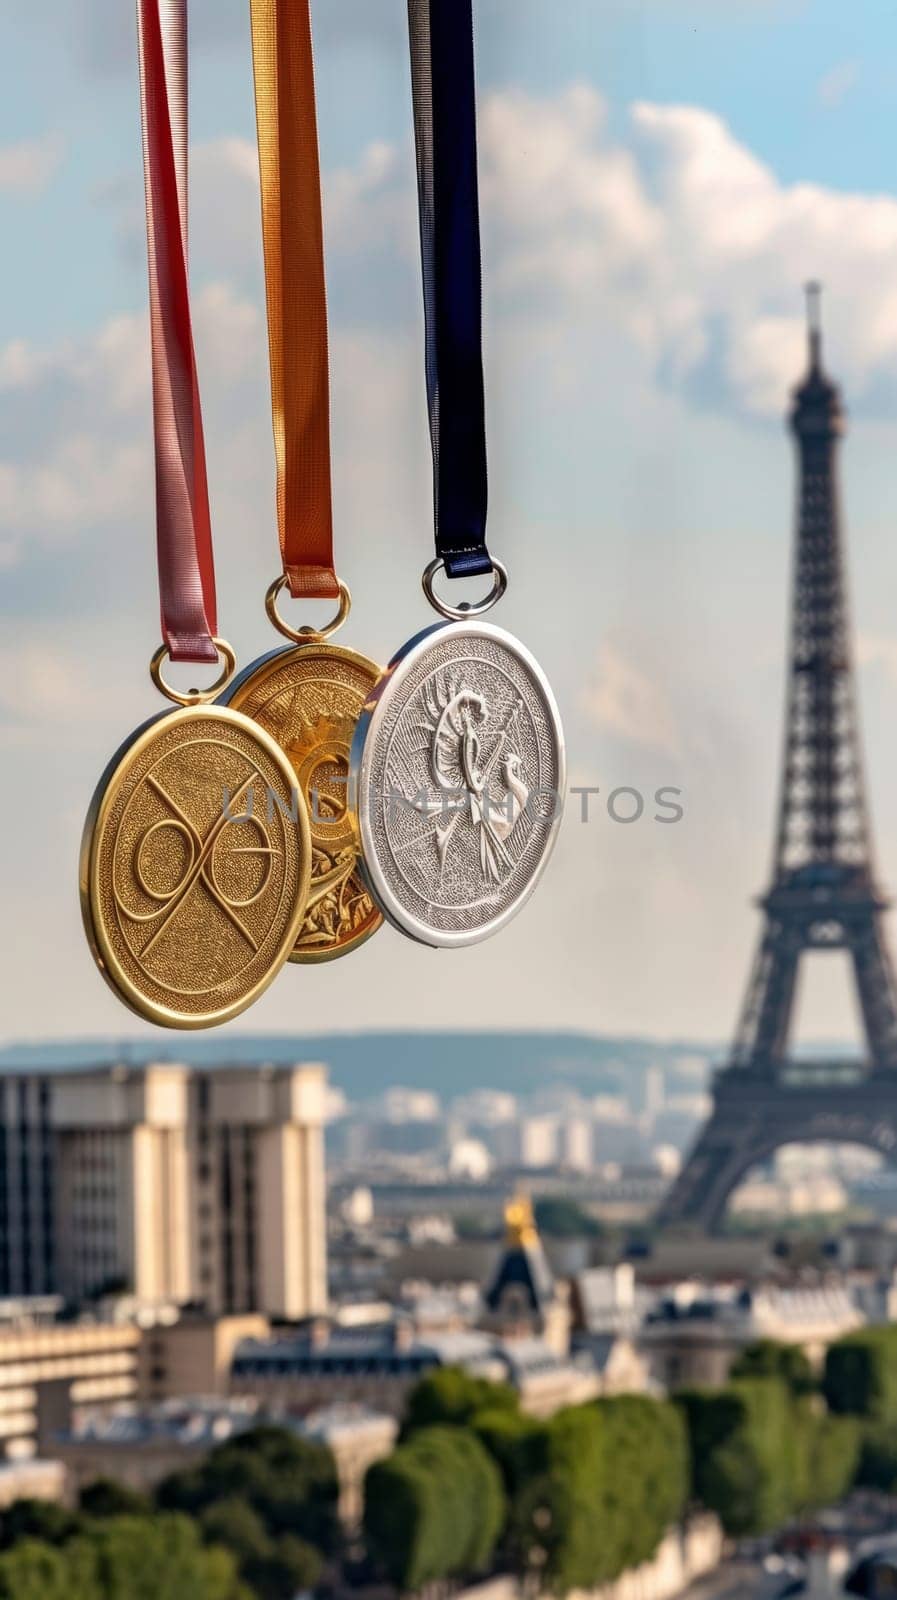 A sharp photo captures medals with intricate designs against a crisp Paris backdrop, including the majestic Eiffel Tower under a clear sky. by sfinks